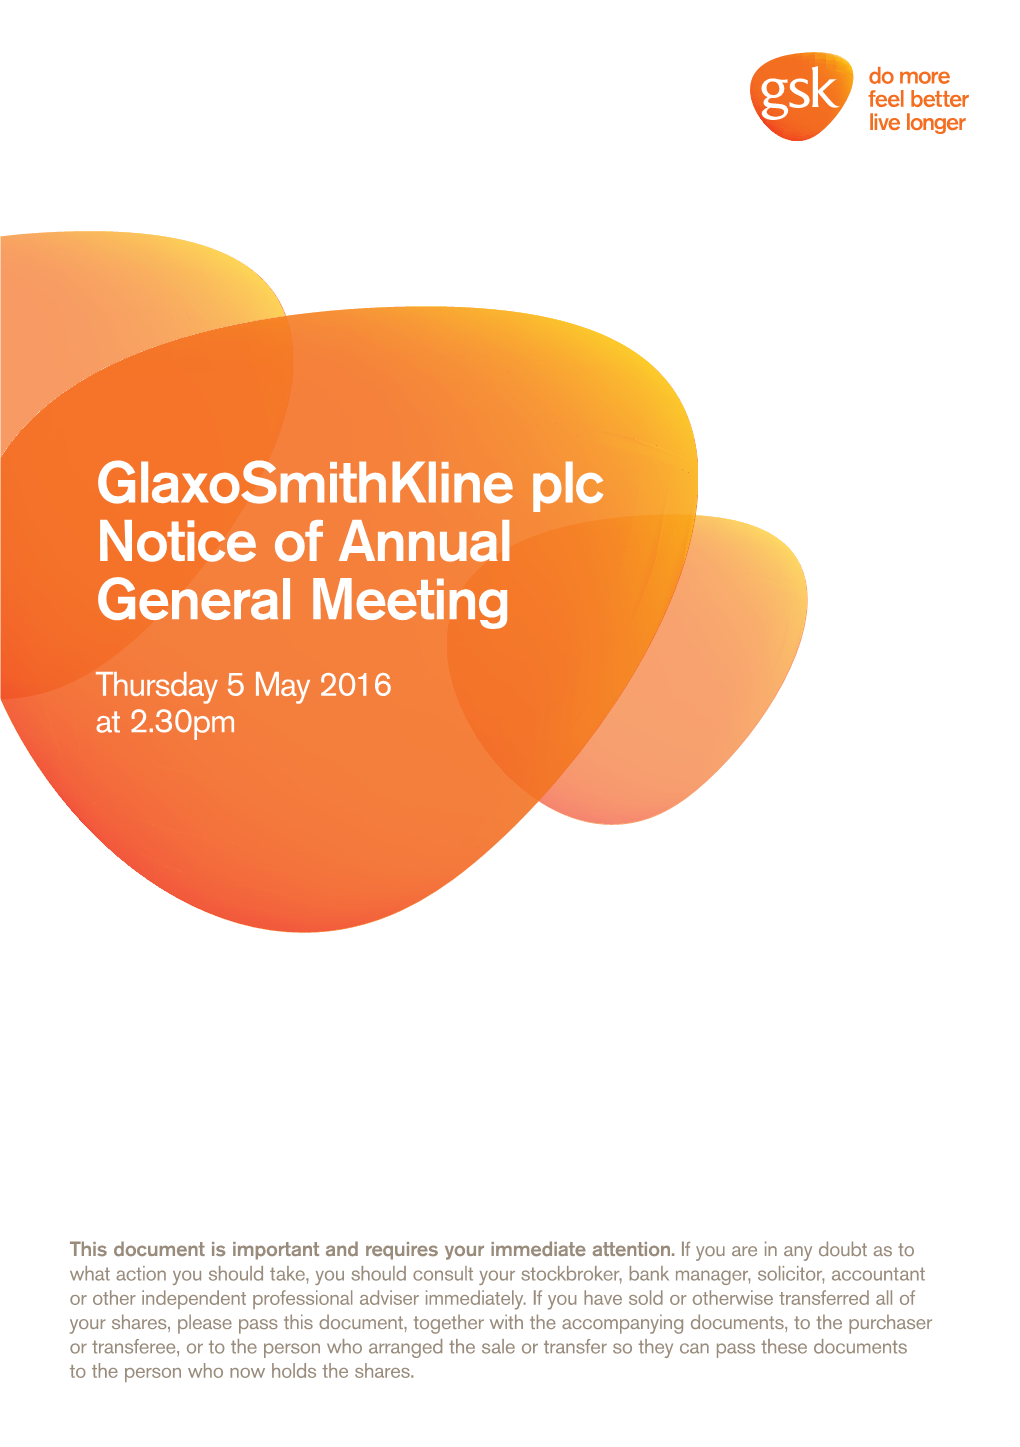 Notice of Meeting for the Sixteenth Annual General Meeting (AGM) of Glaxosmithkline Plc